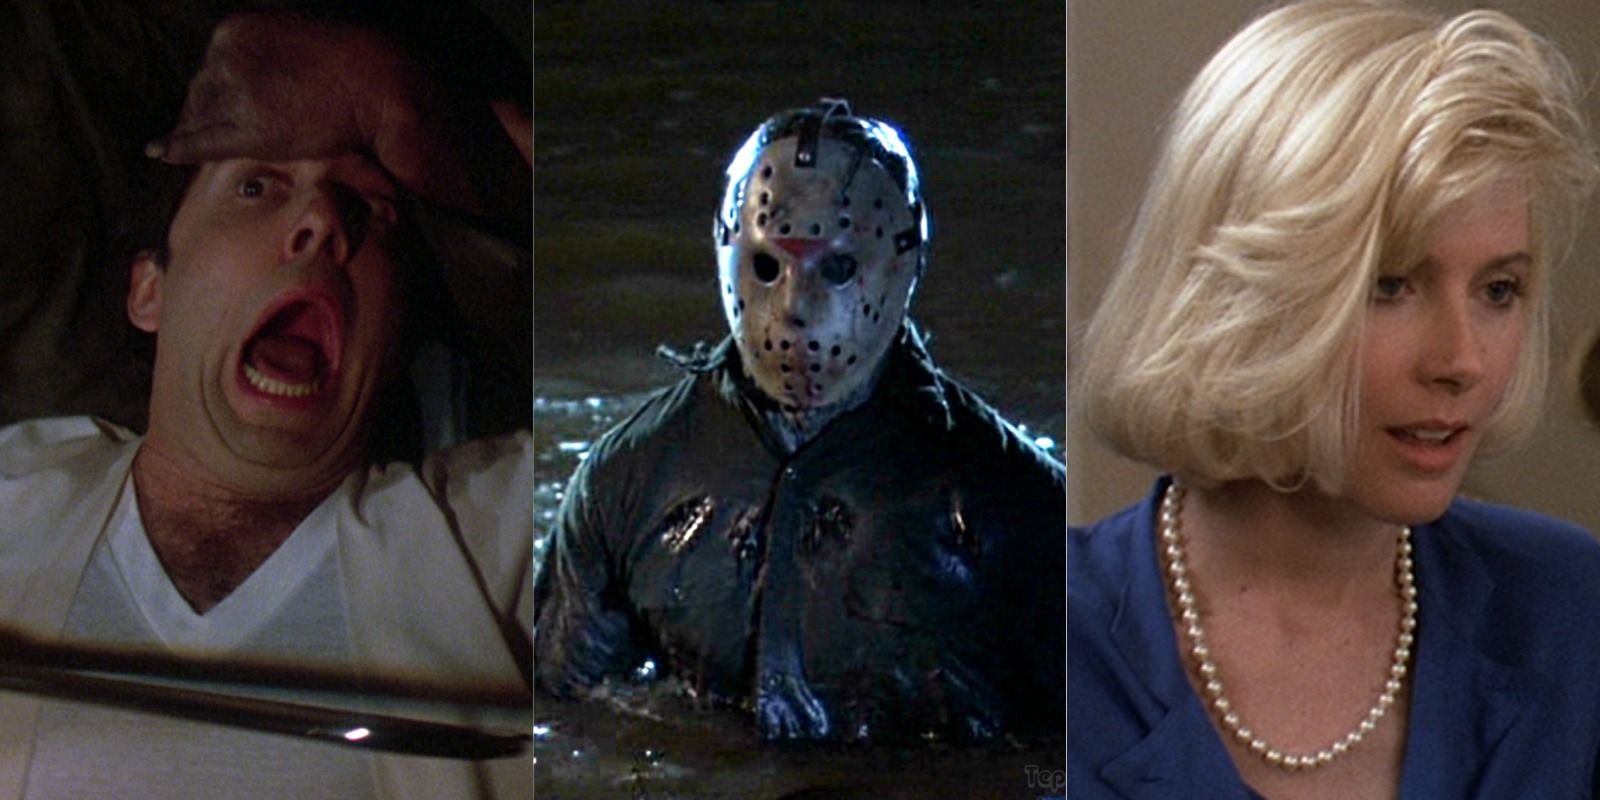 Friday The 13th 10 Characters That Deserved Their Fate - Featured Image